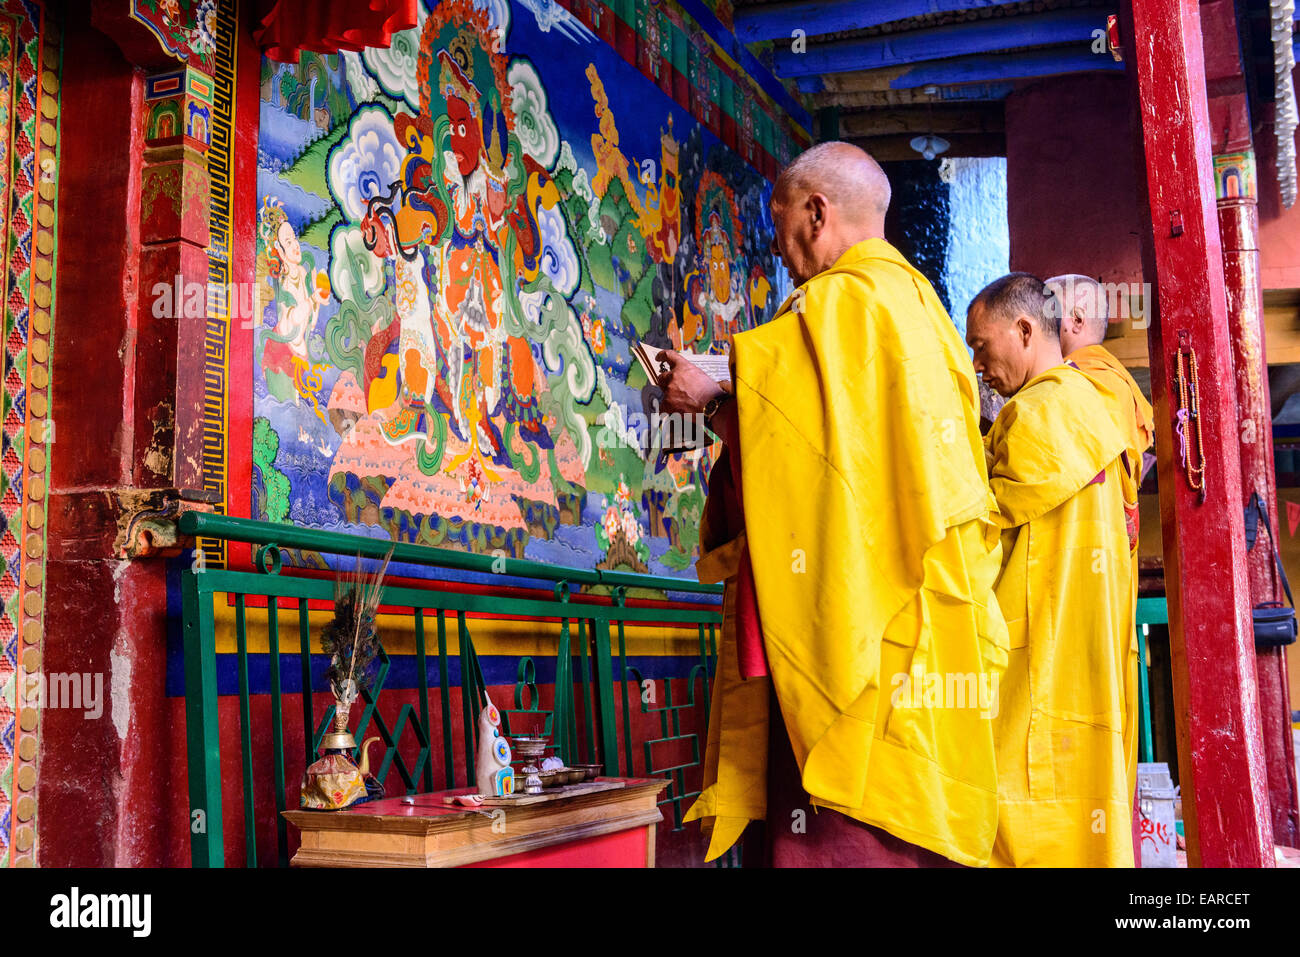 Three monks of Lamayuru Gompa are praying in front of a colorful religious wall painting, Ladakh, Jammu and Kashmir, India Stock Photo